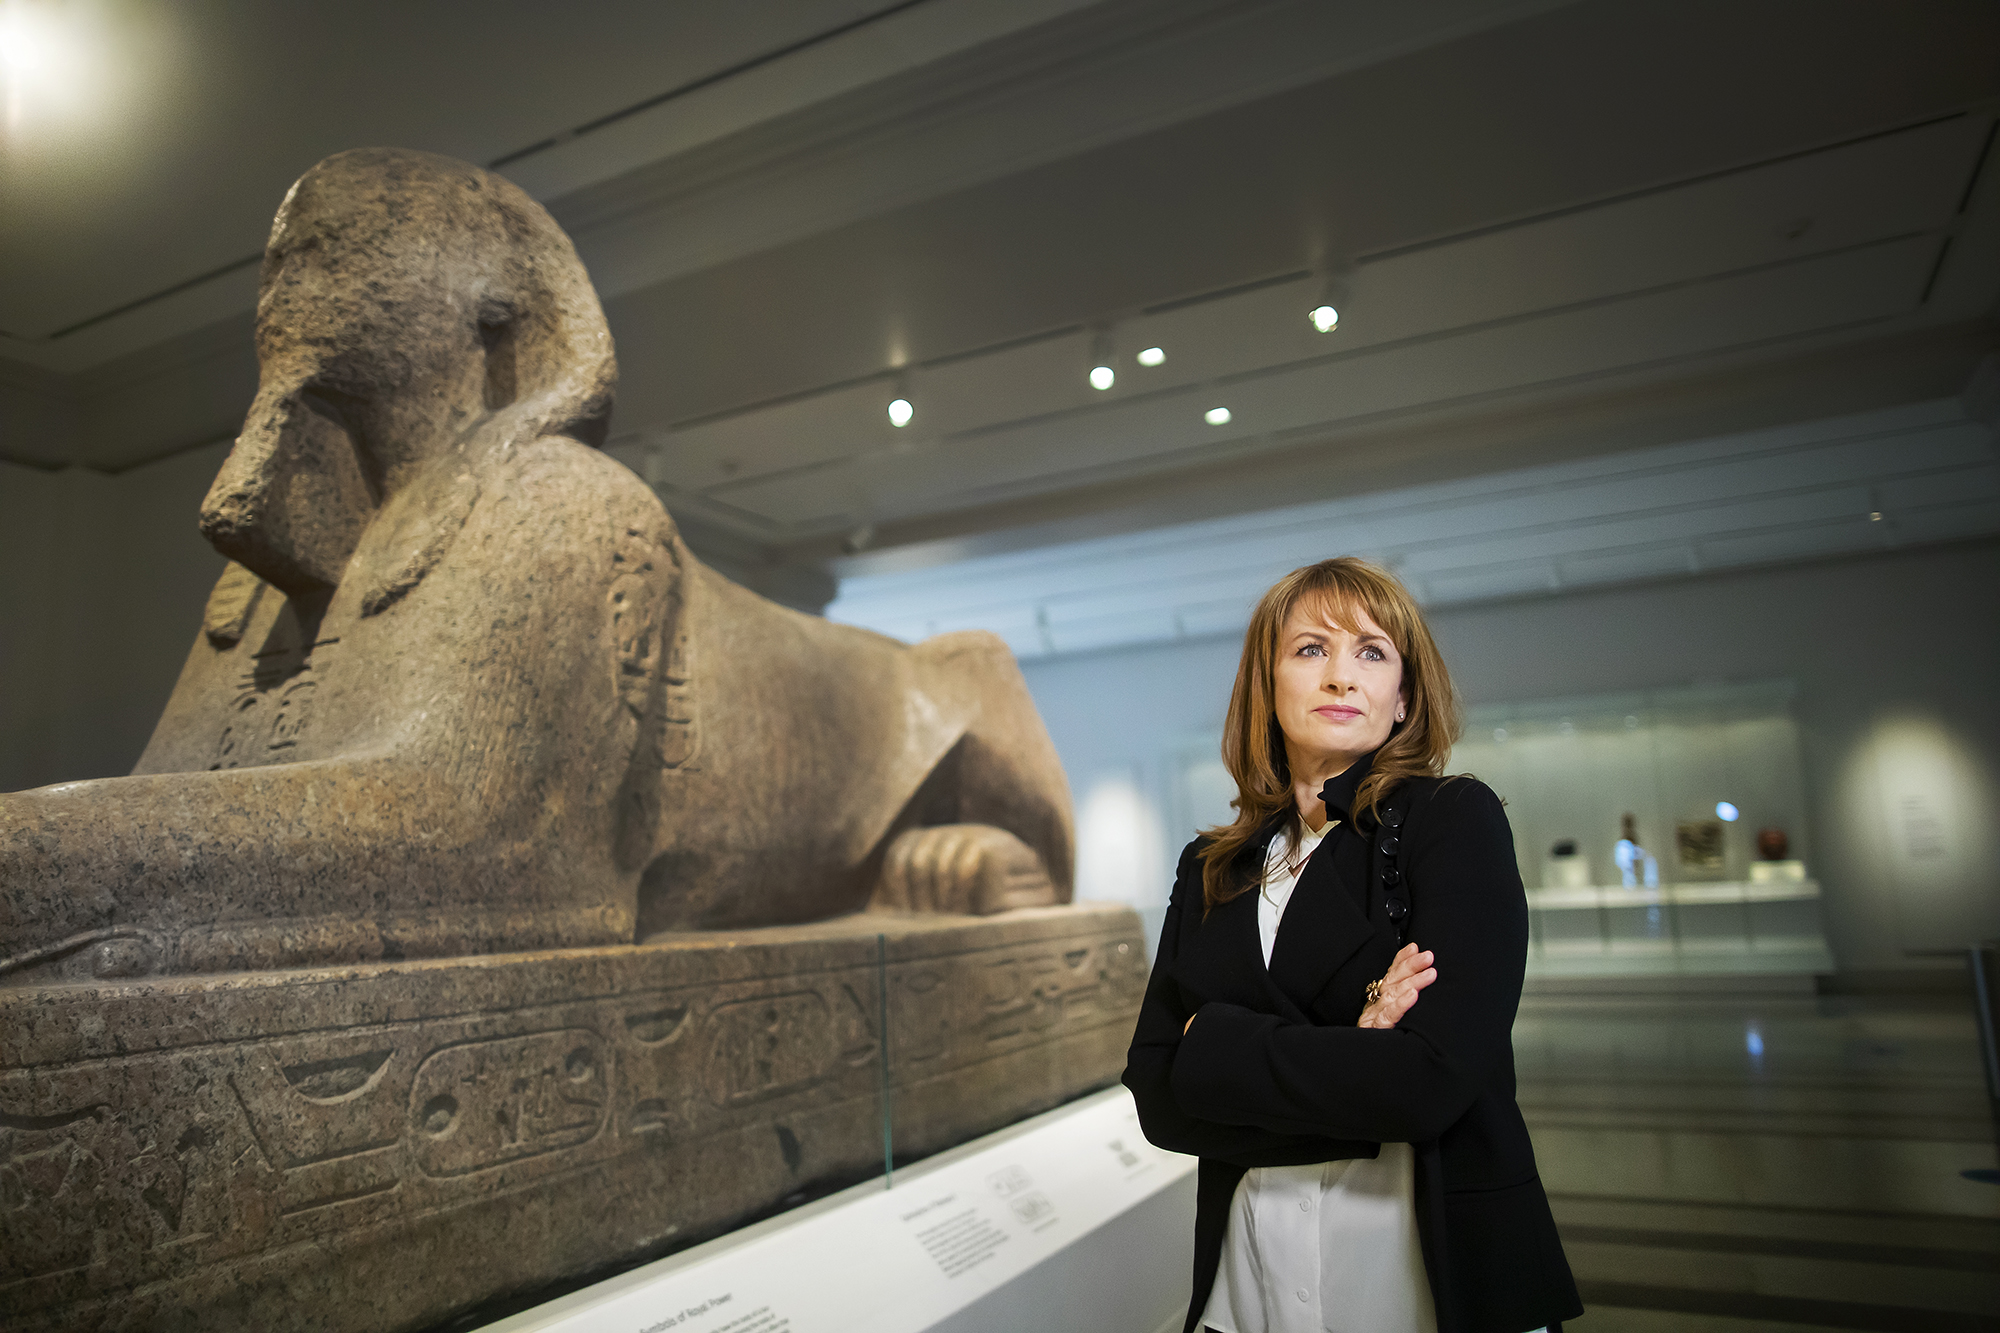 Lynn Meskell standing in the Penn Museum next to the sphinx looking ahead with arms crossed.